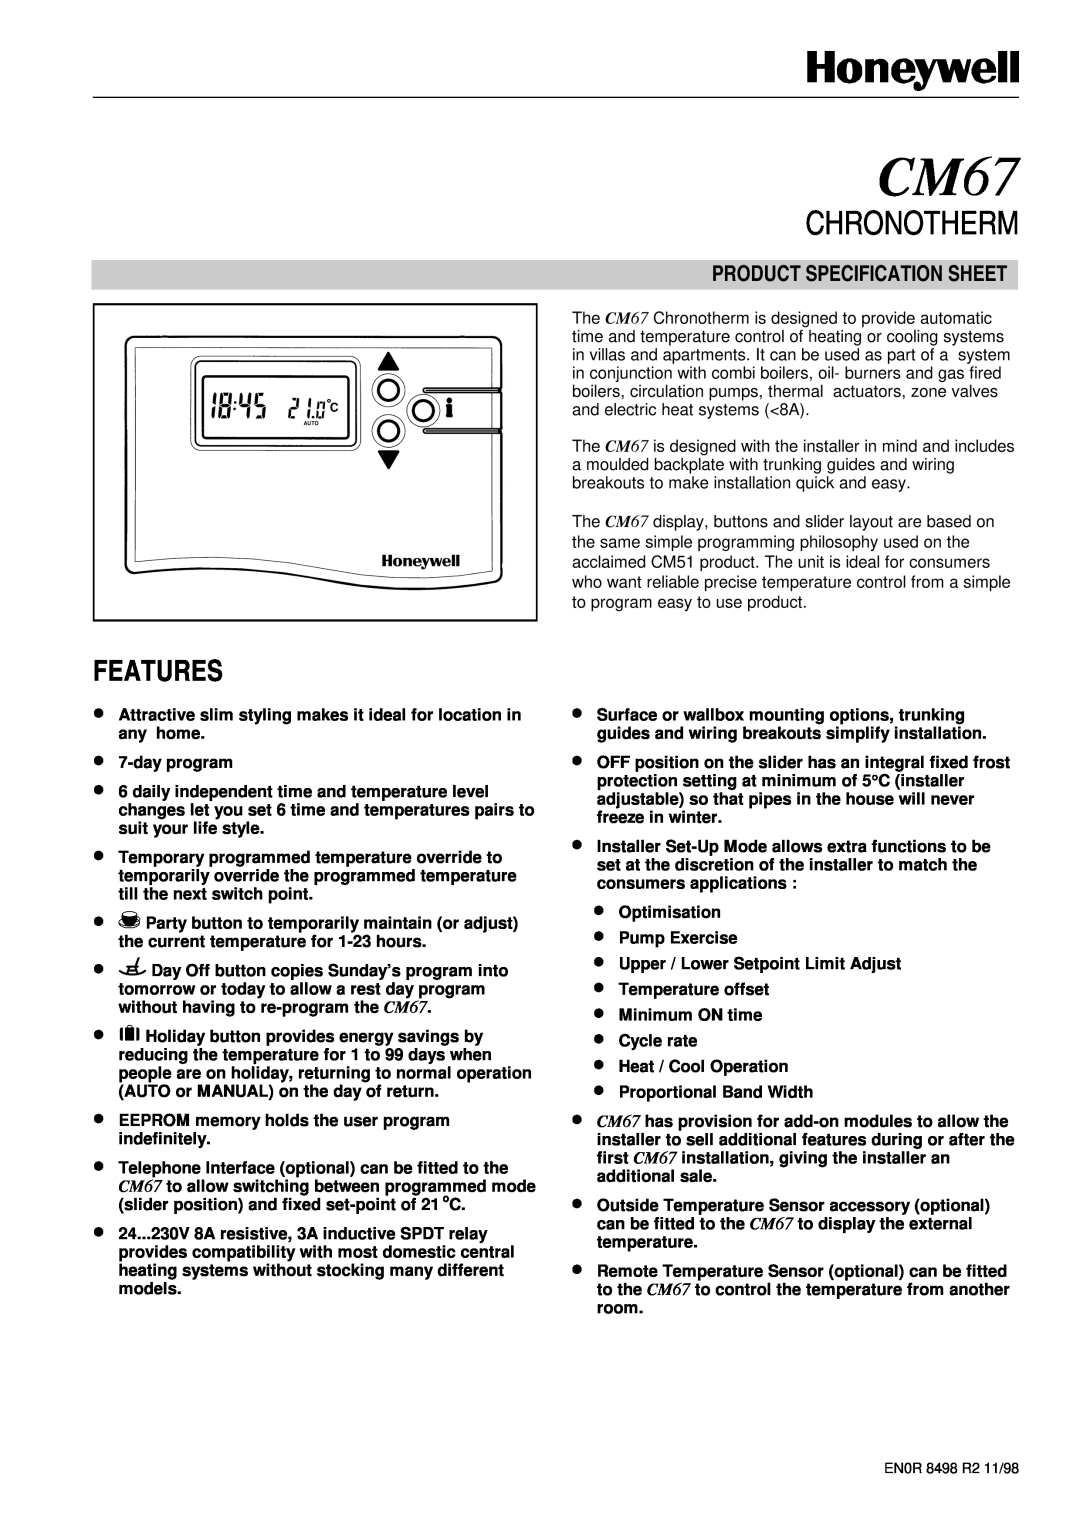 Honeywell CM67 specifications Features, Product Specification Sheet, Chronotherm 